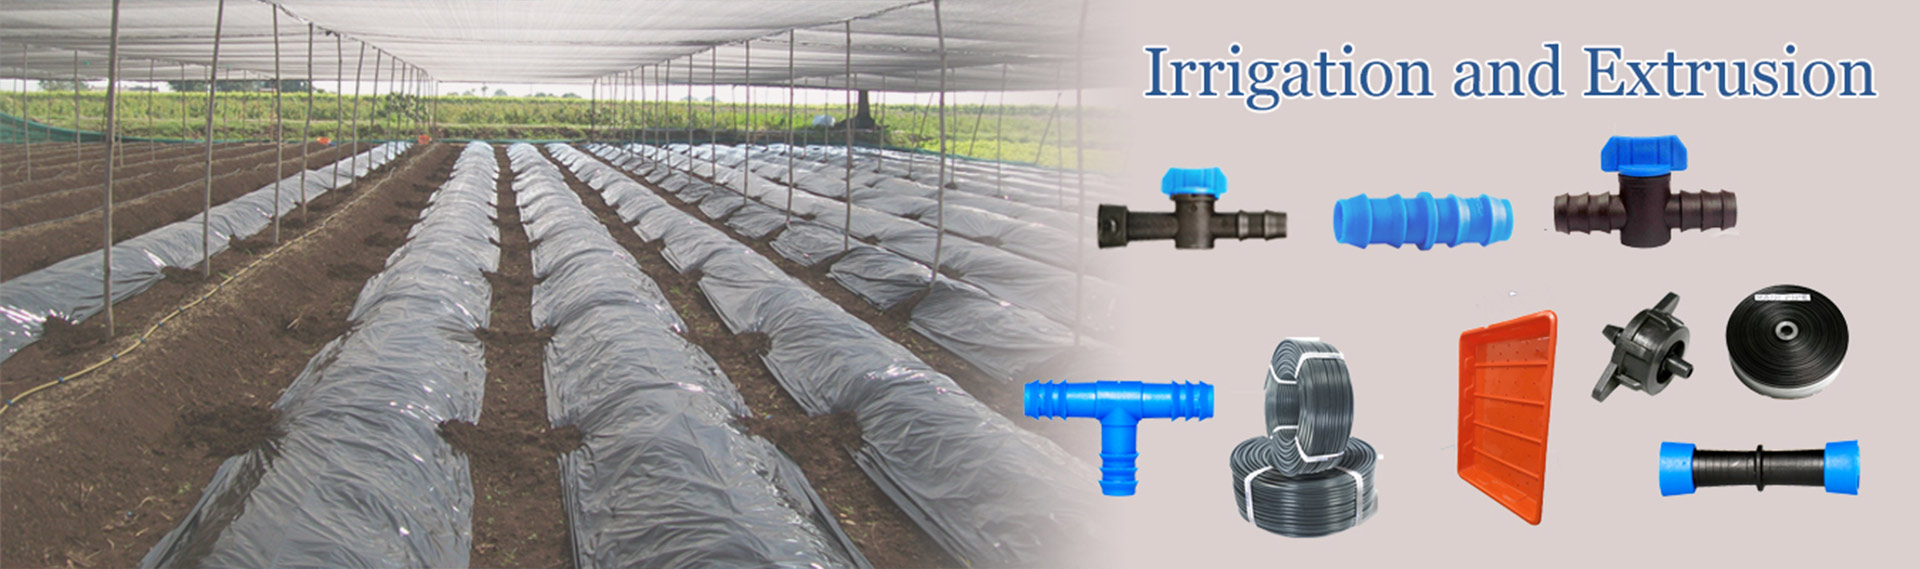 Irrigation and Extrusion